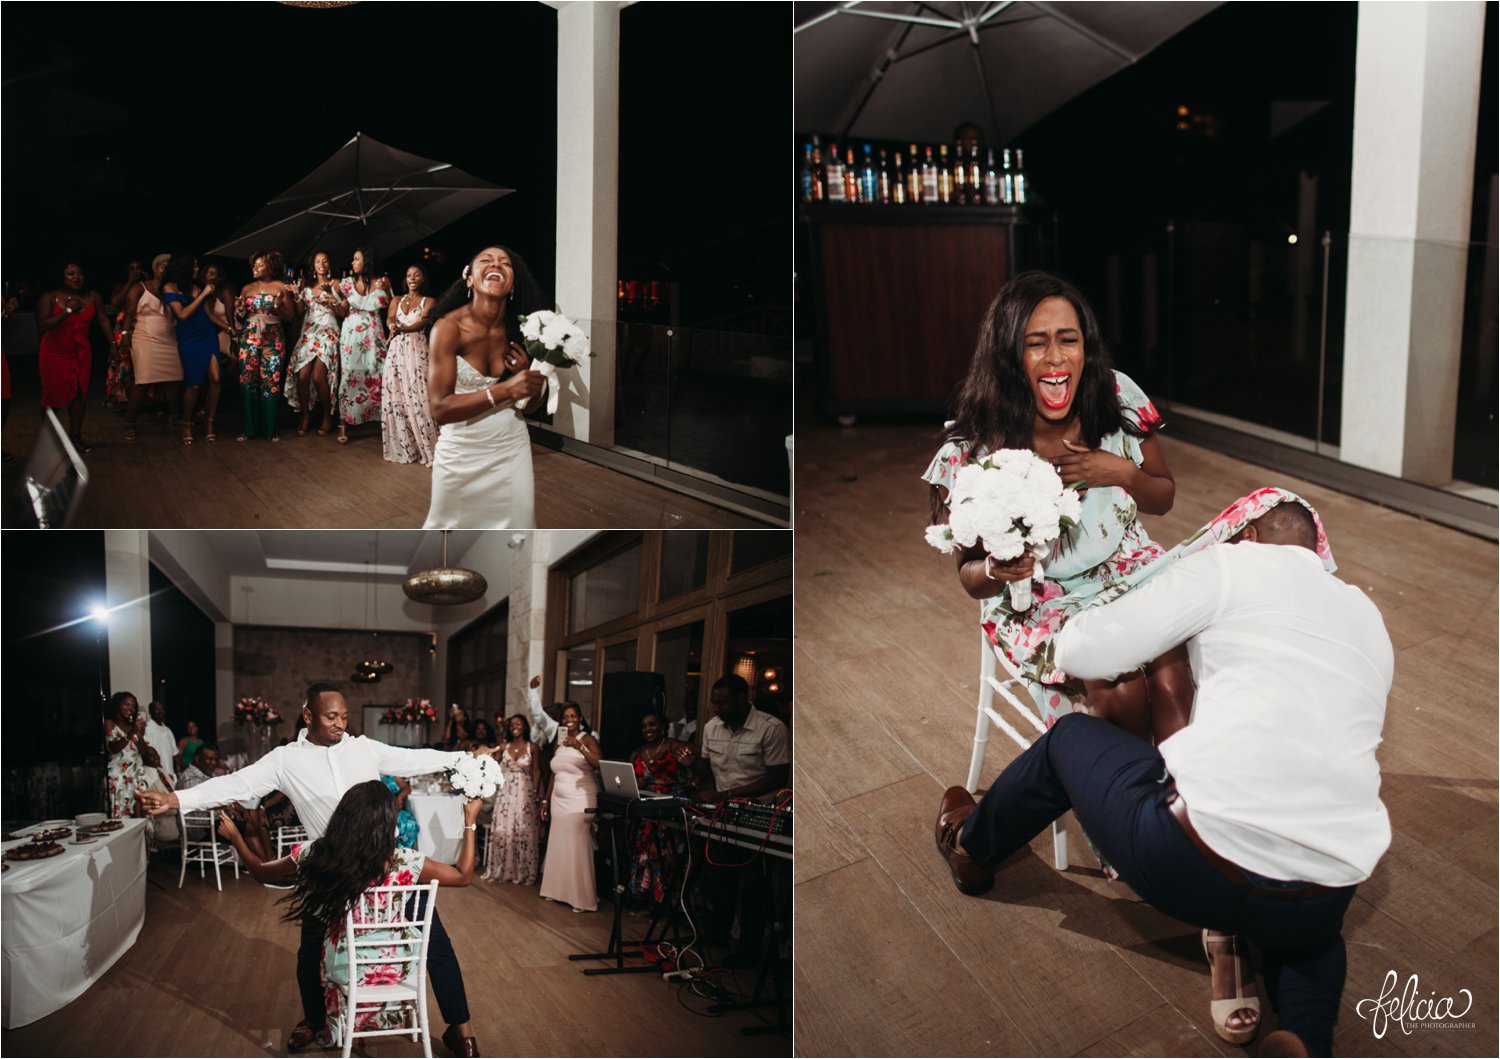   images by feliciathephotographer.com | destination wedding photographer | st lucia | l&s travel | the Royalton | reception | details | groom serenading bride | throwing the garter | white fitted gown | navy suit | tossing the bouquet | laughter | 